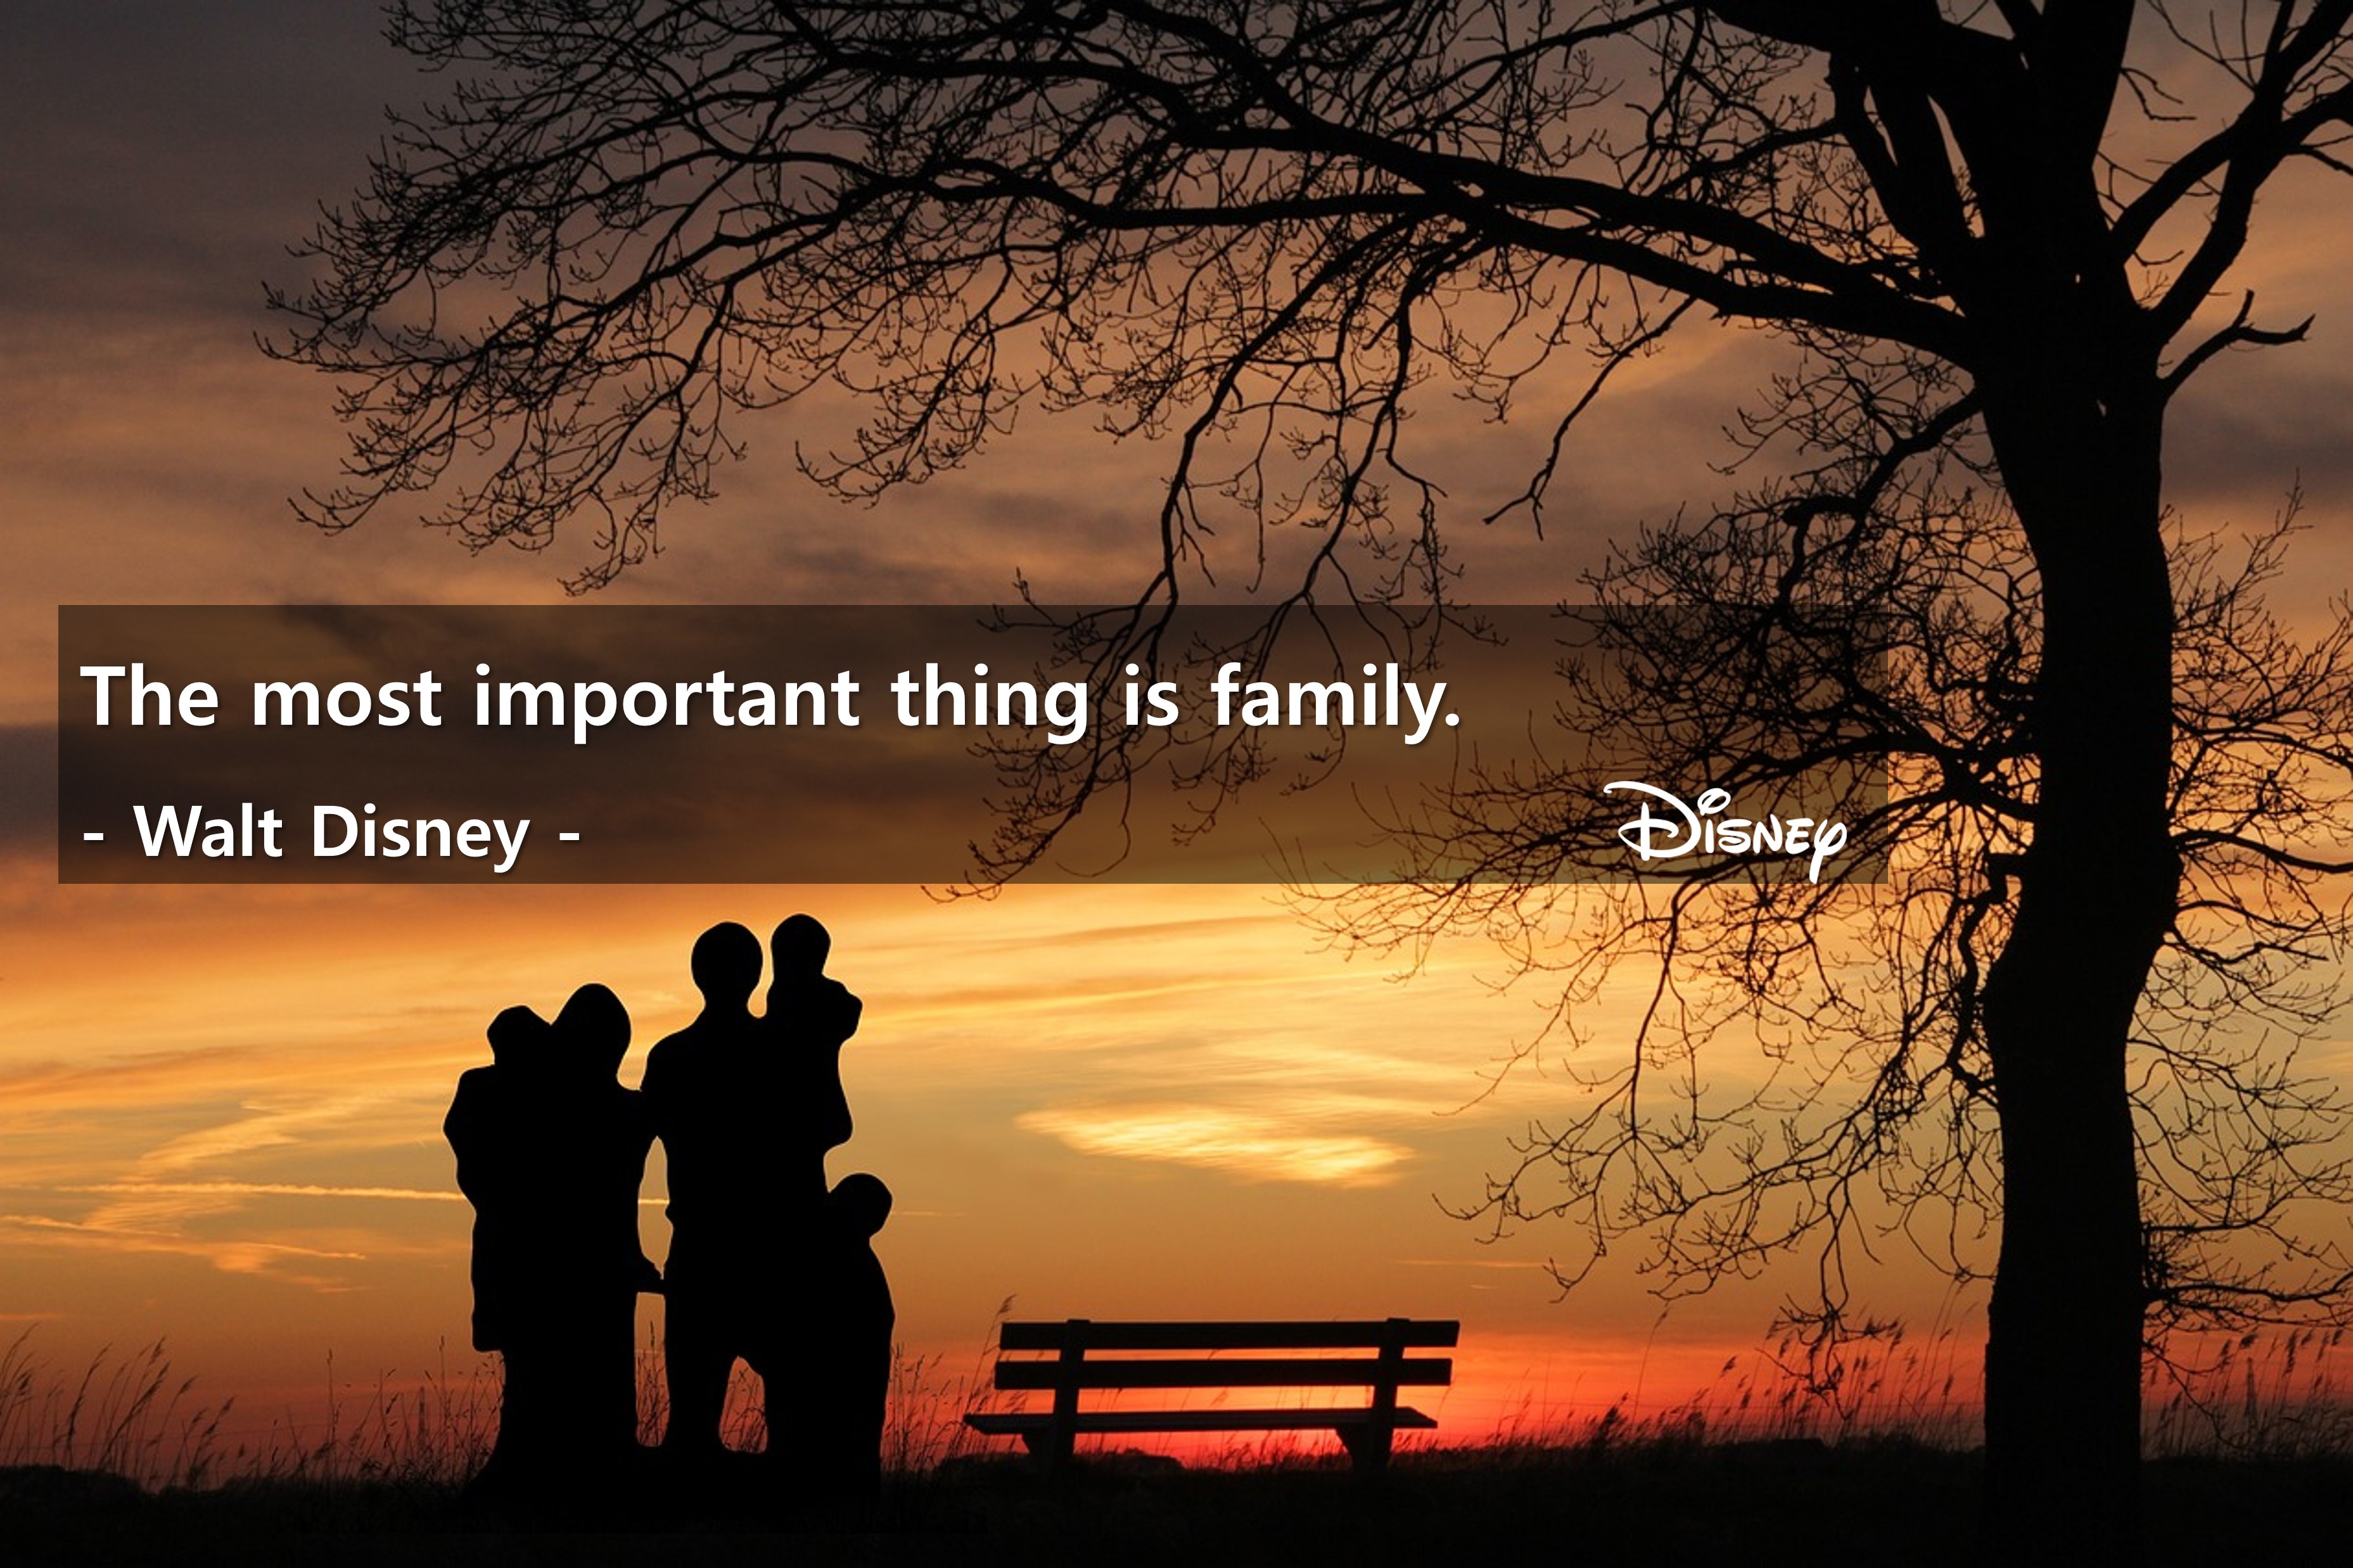 The most important thing is family.
- Walt Disney -